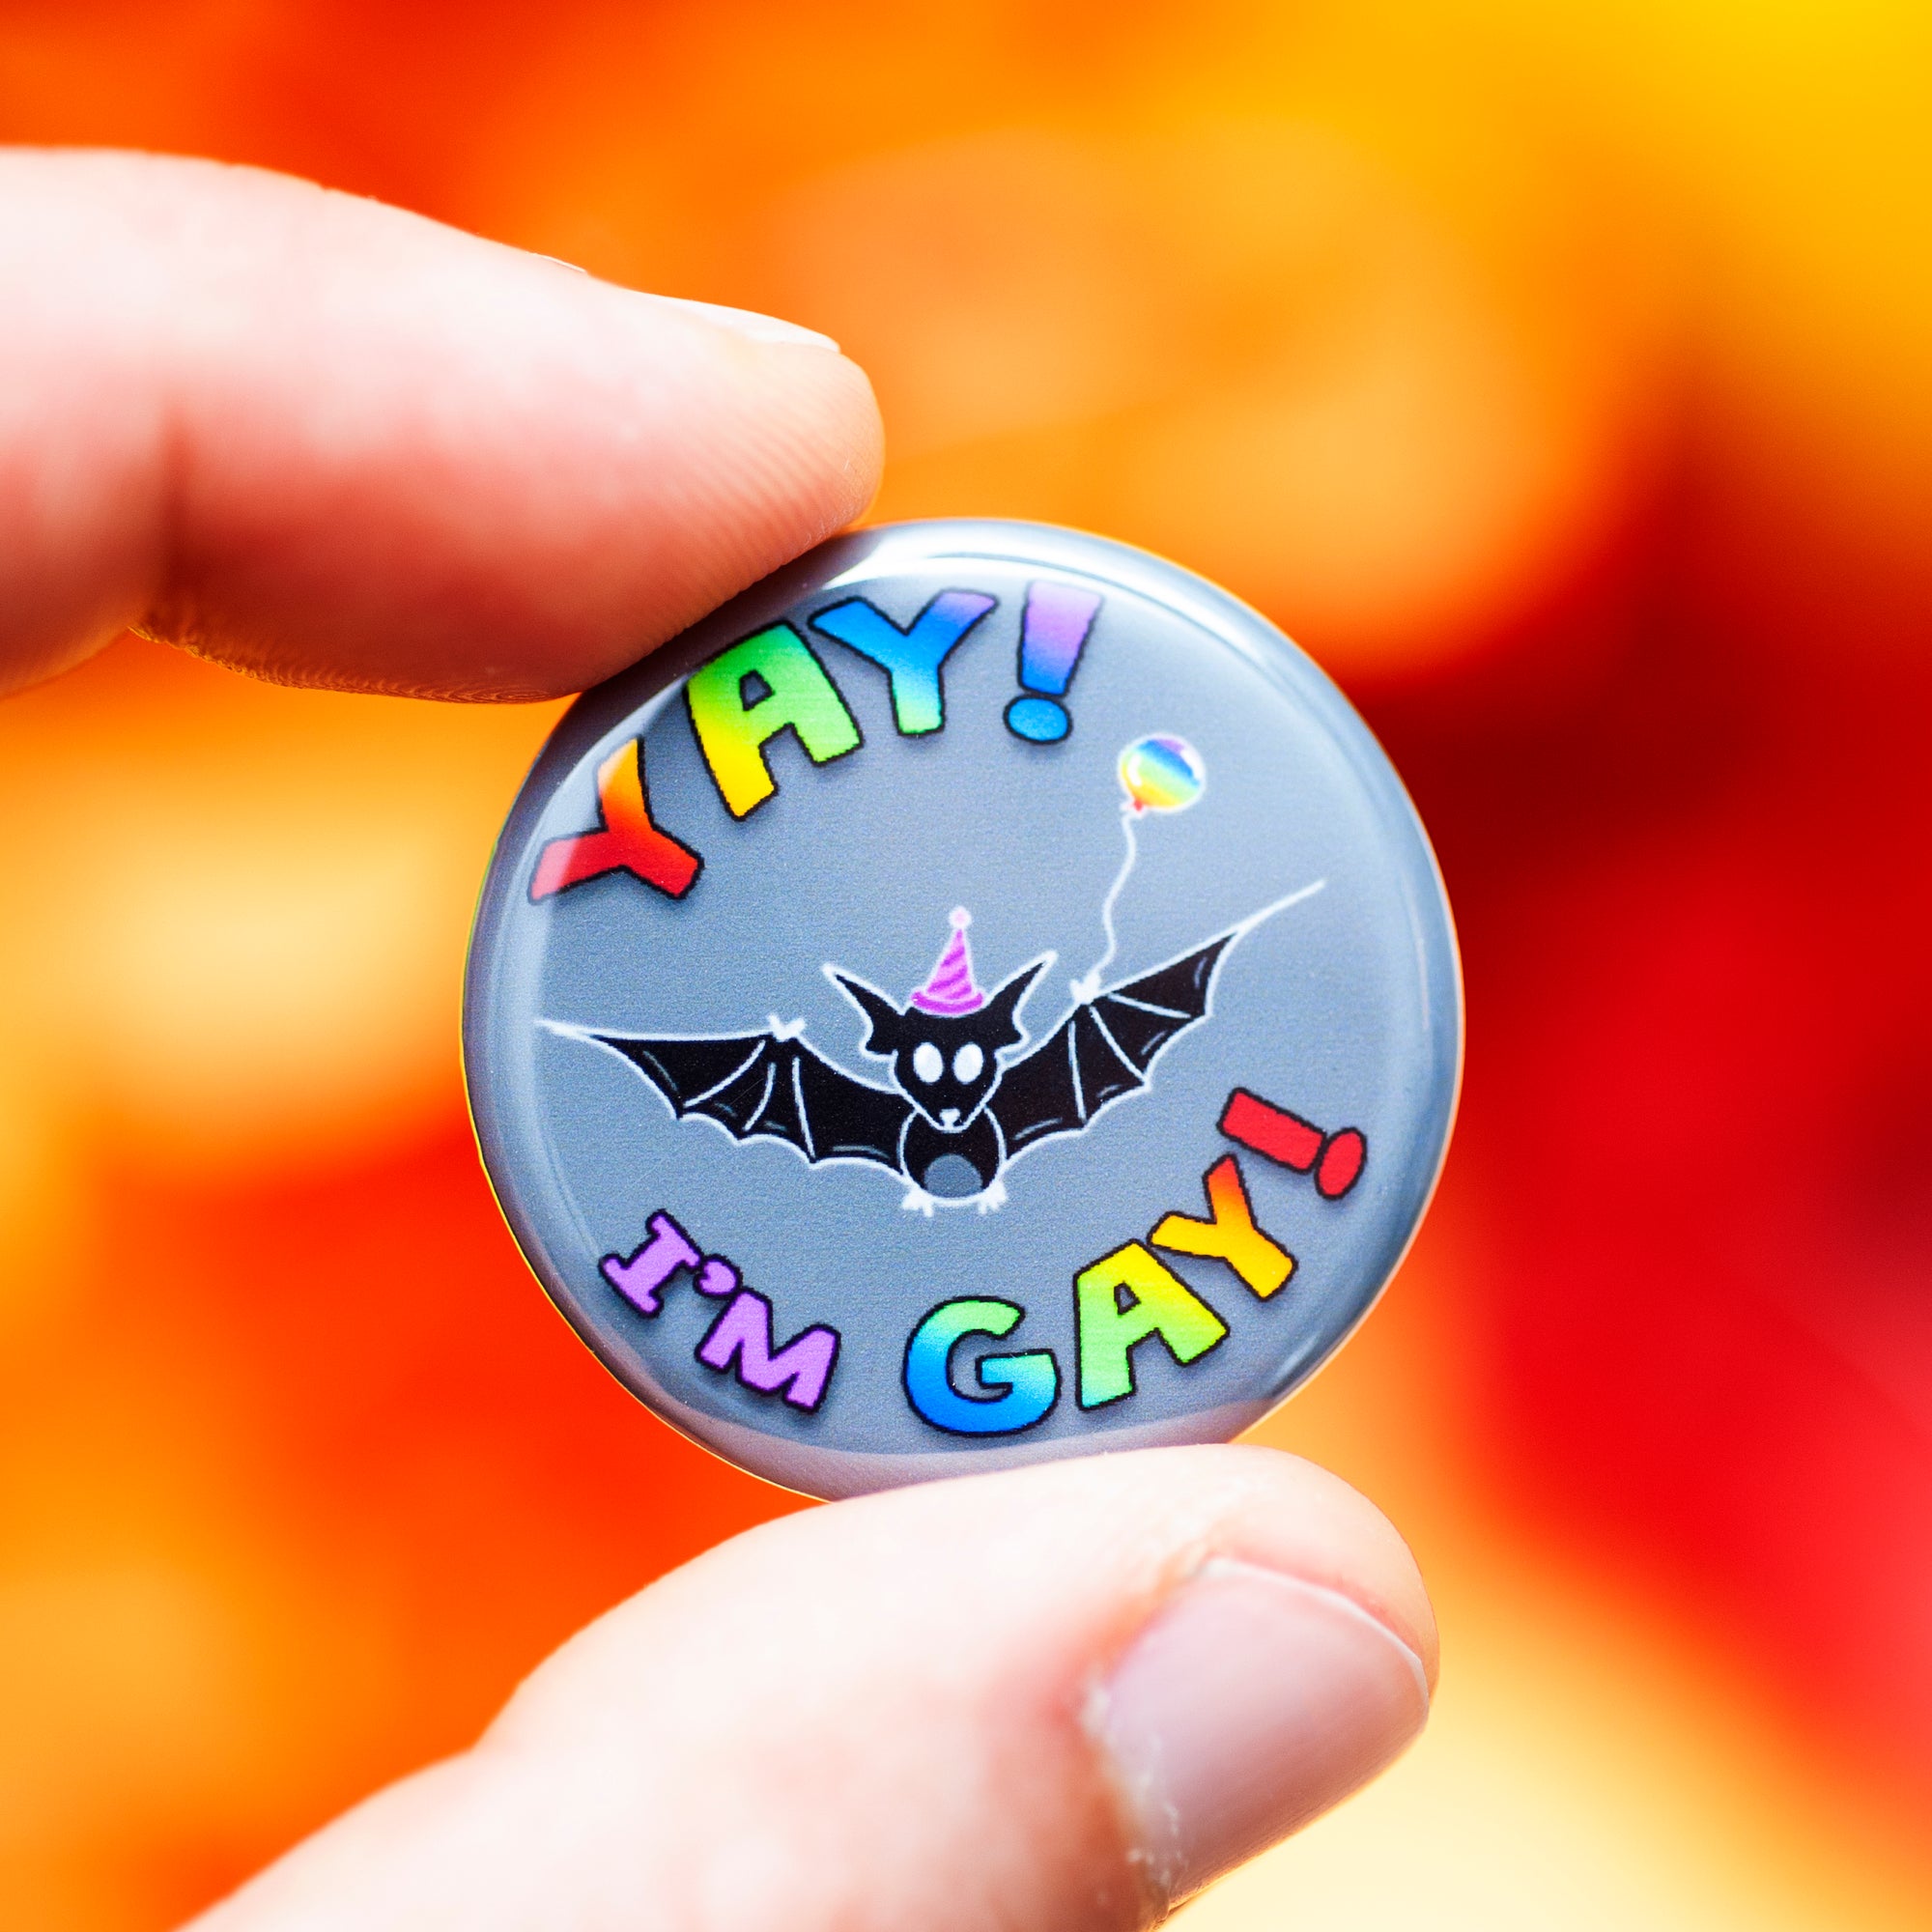 CQS "yay I'm gay" button held up against a red-orange background